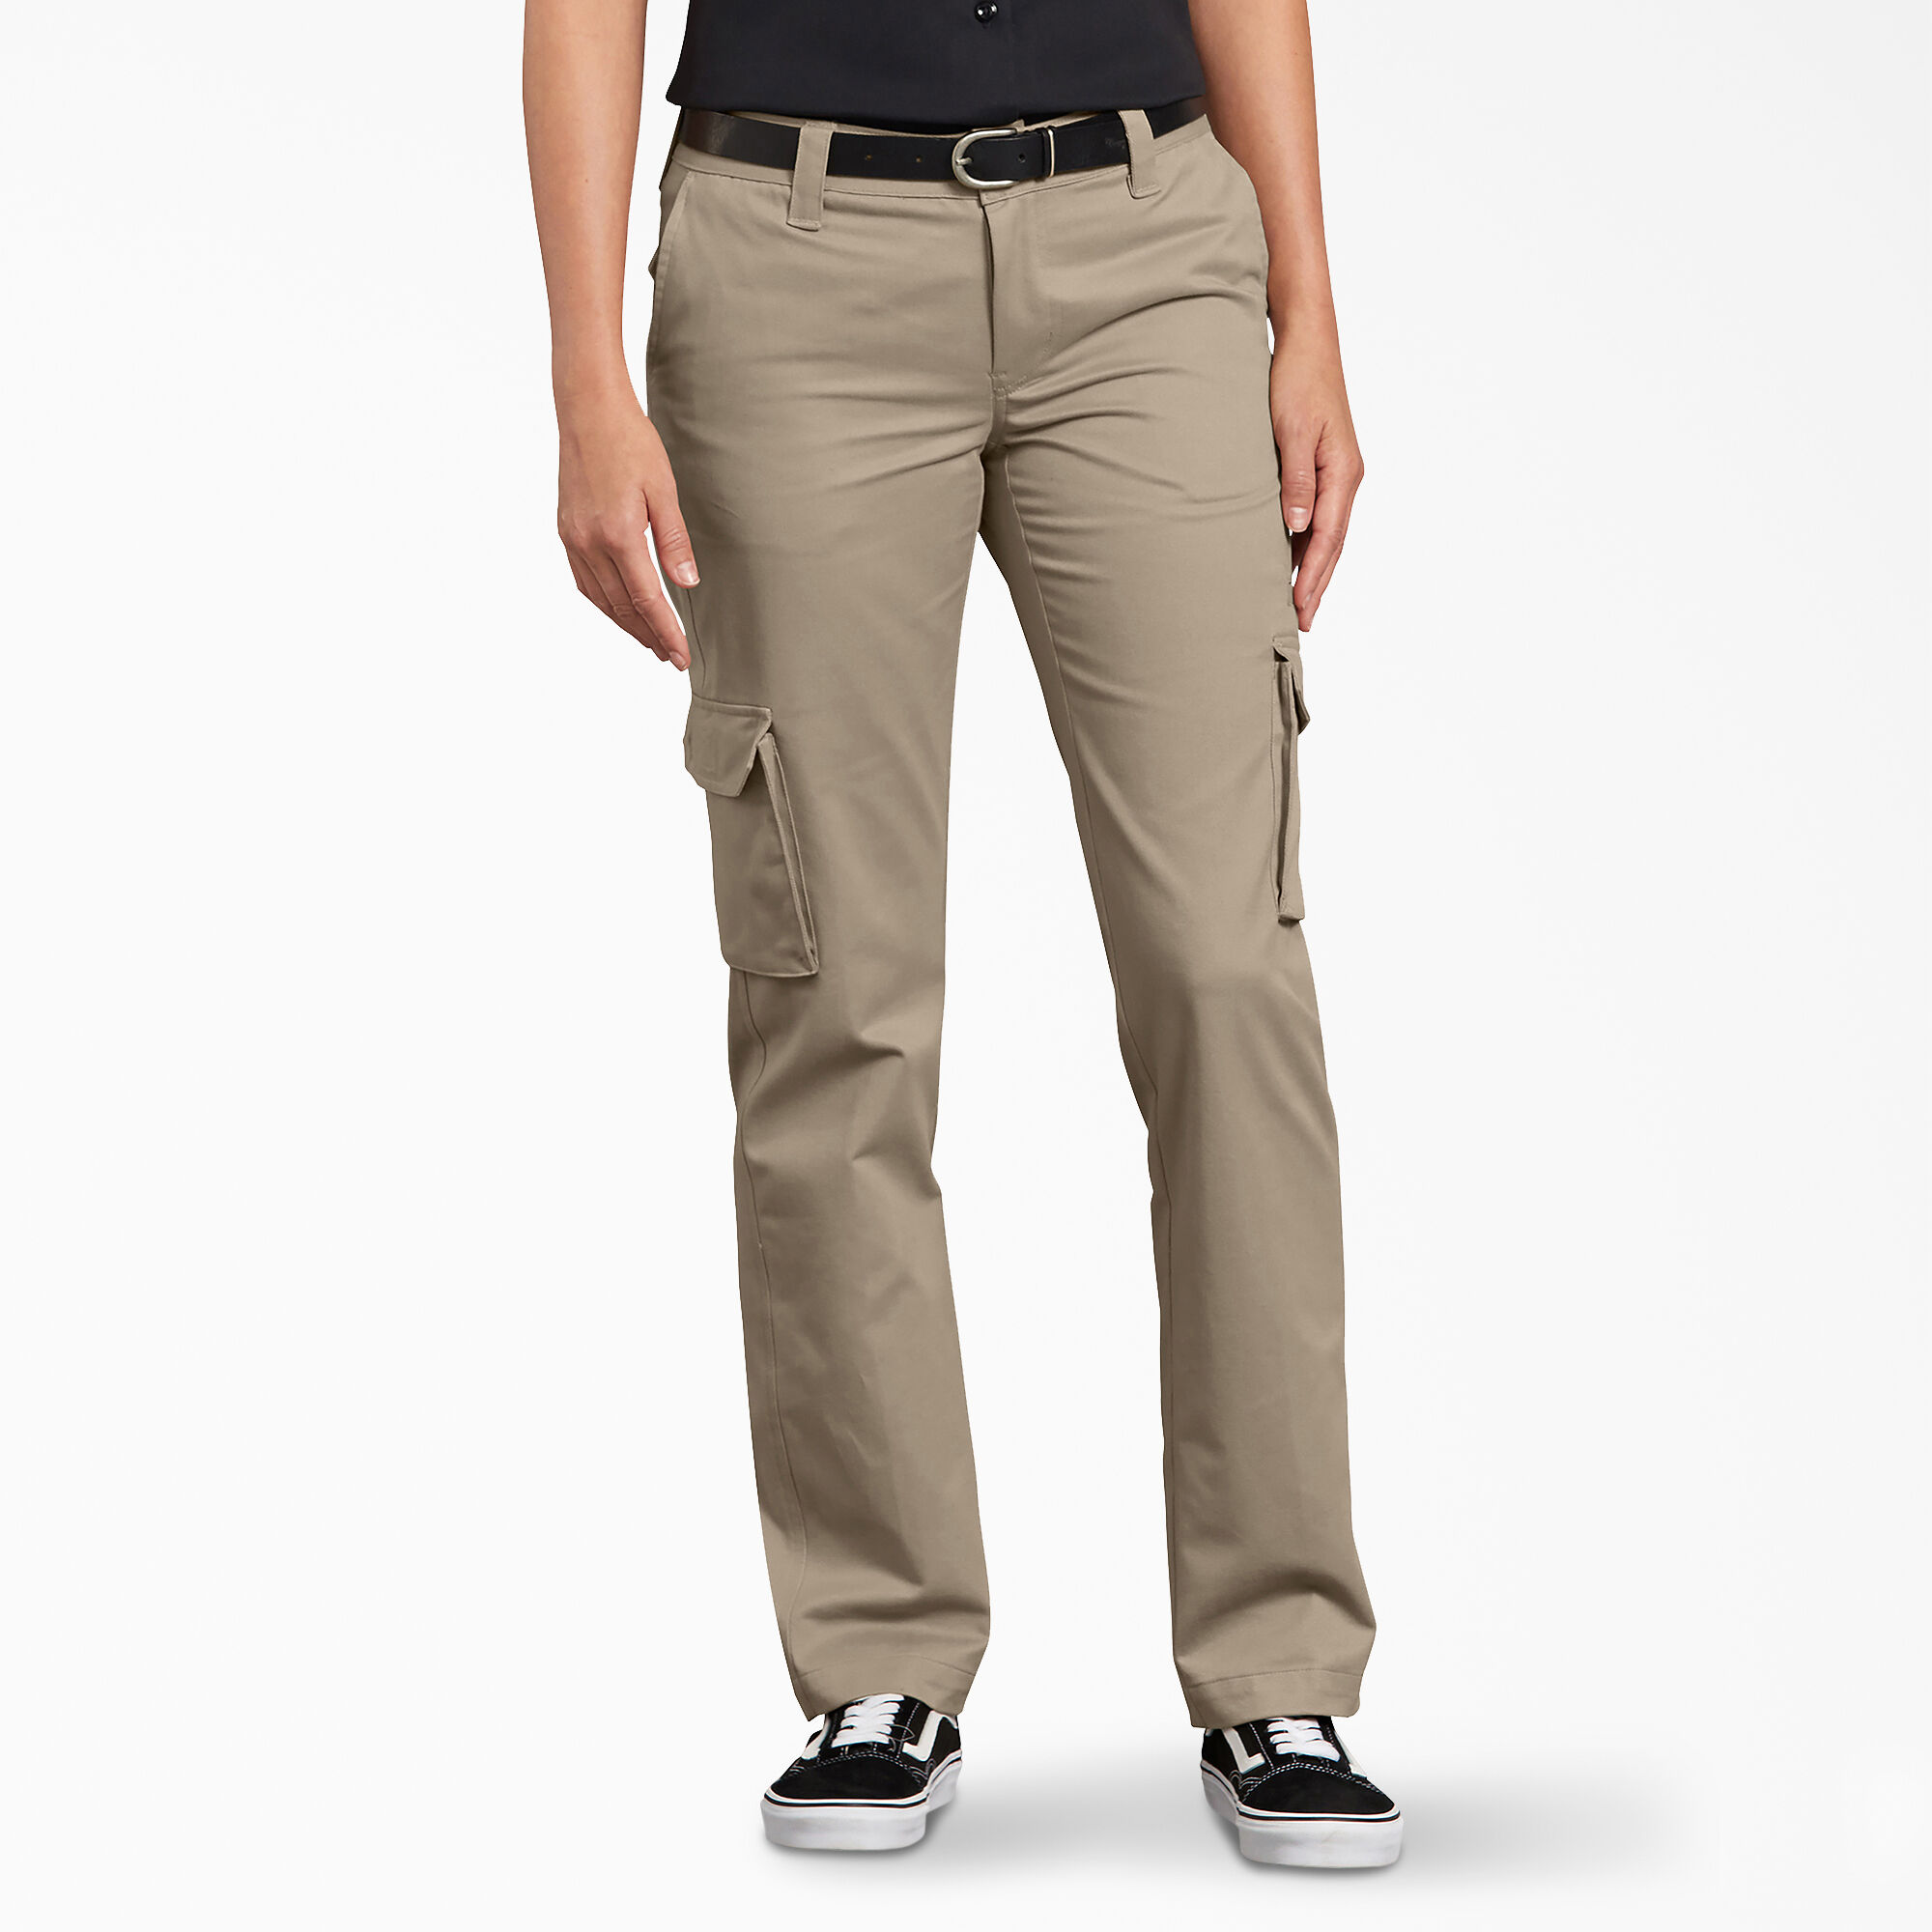 stretch cargo pants for ladies